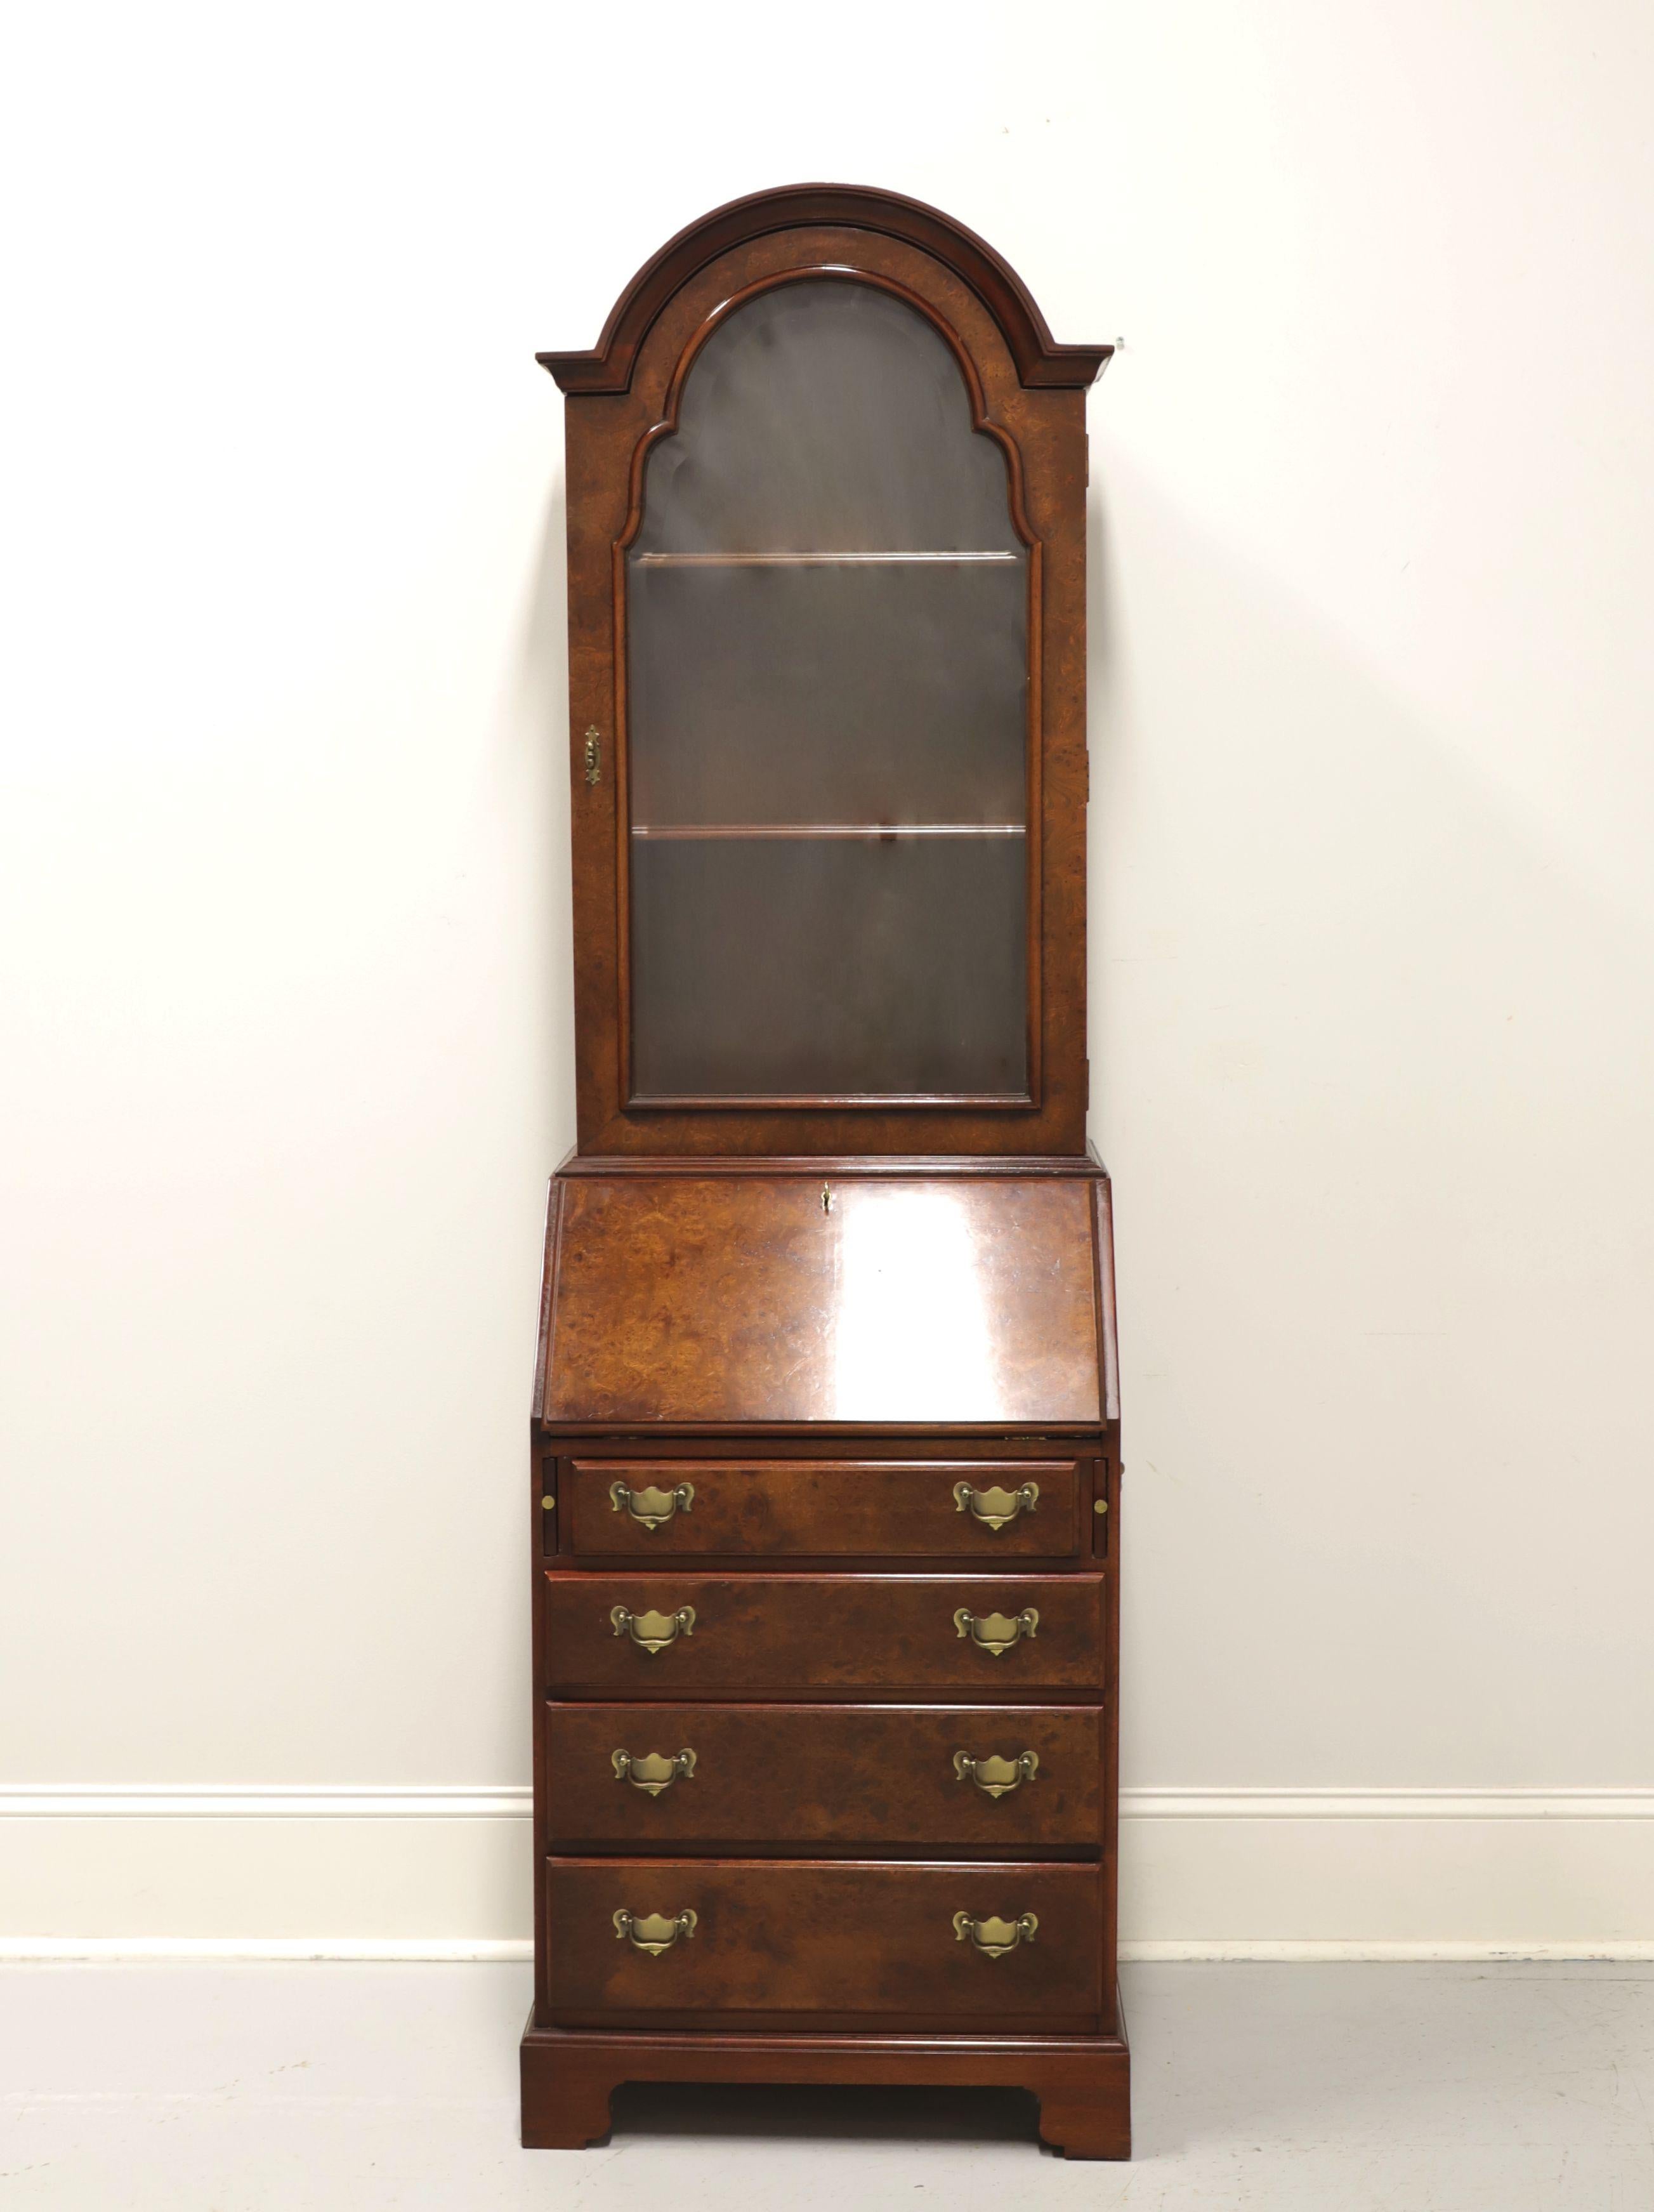 A secretary desk in the Chippendale style by Hickory Chair, from The James River Collection. Burl walnut, brass hardware, single bonnet arched top, slant front and bracket feet. Upper cabinet features two adjustable wood shelves behind a single